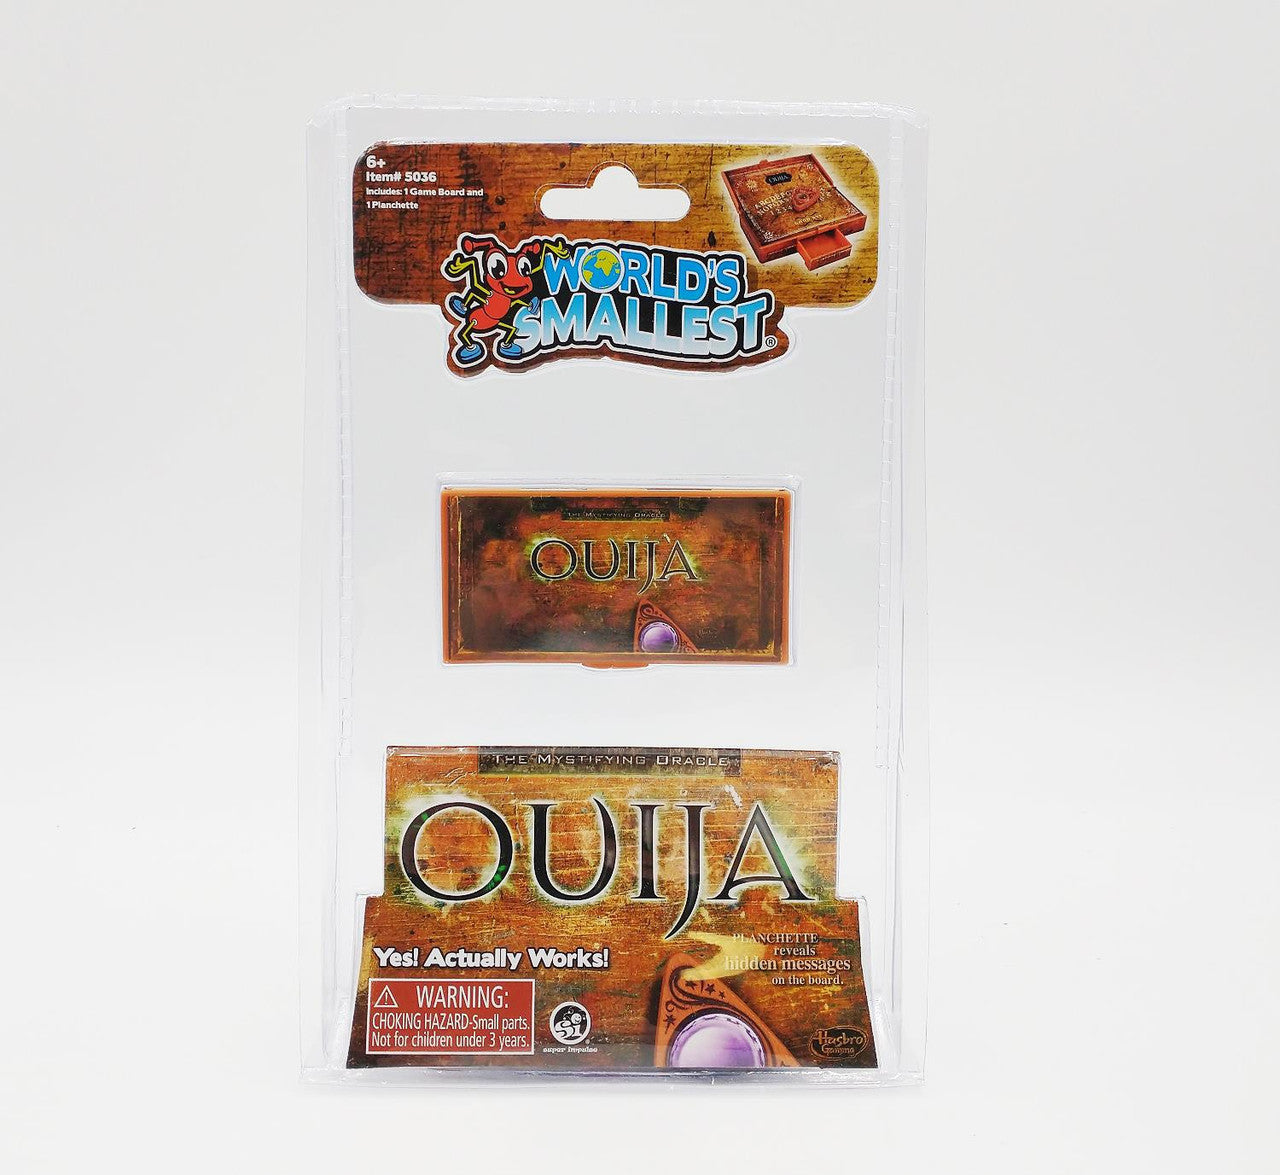 Toy World's Smallest Ouija-hotRAGS.com